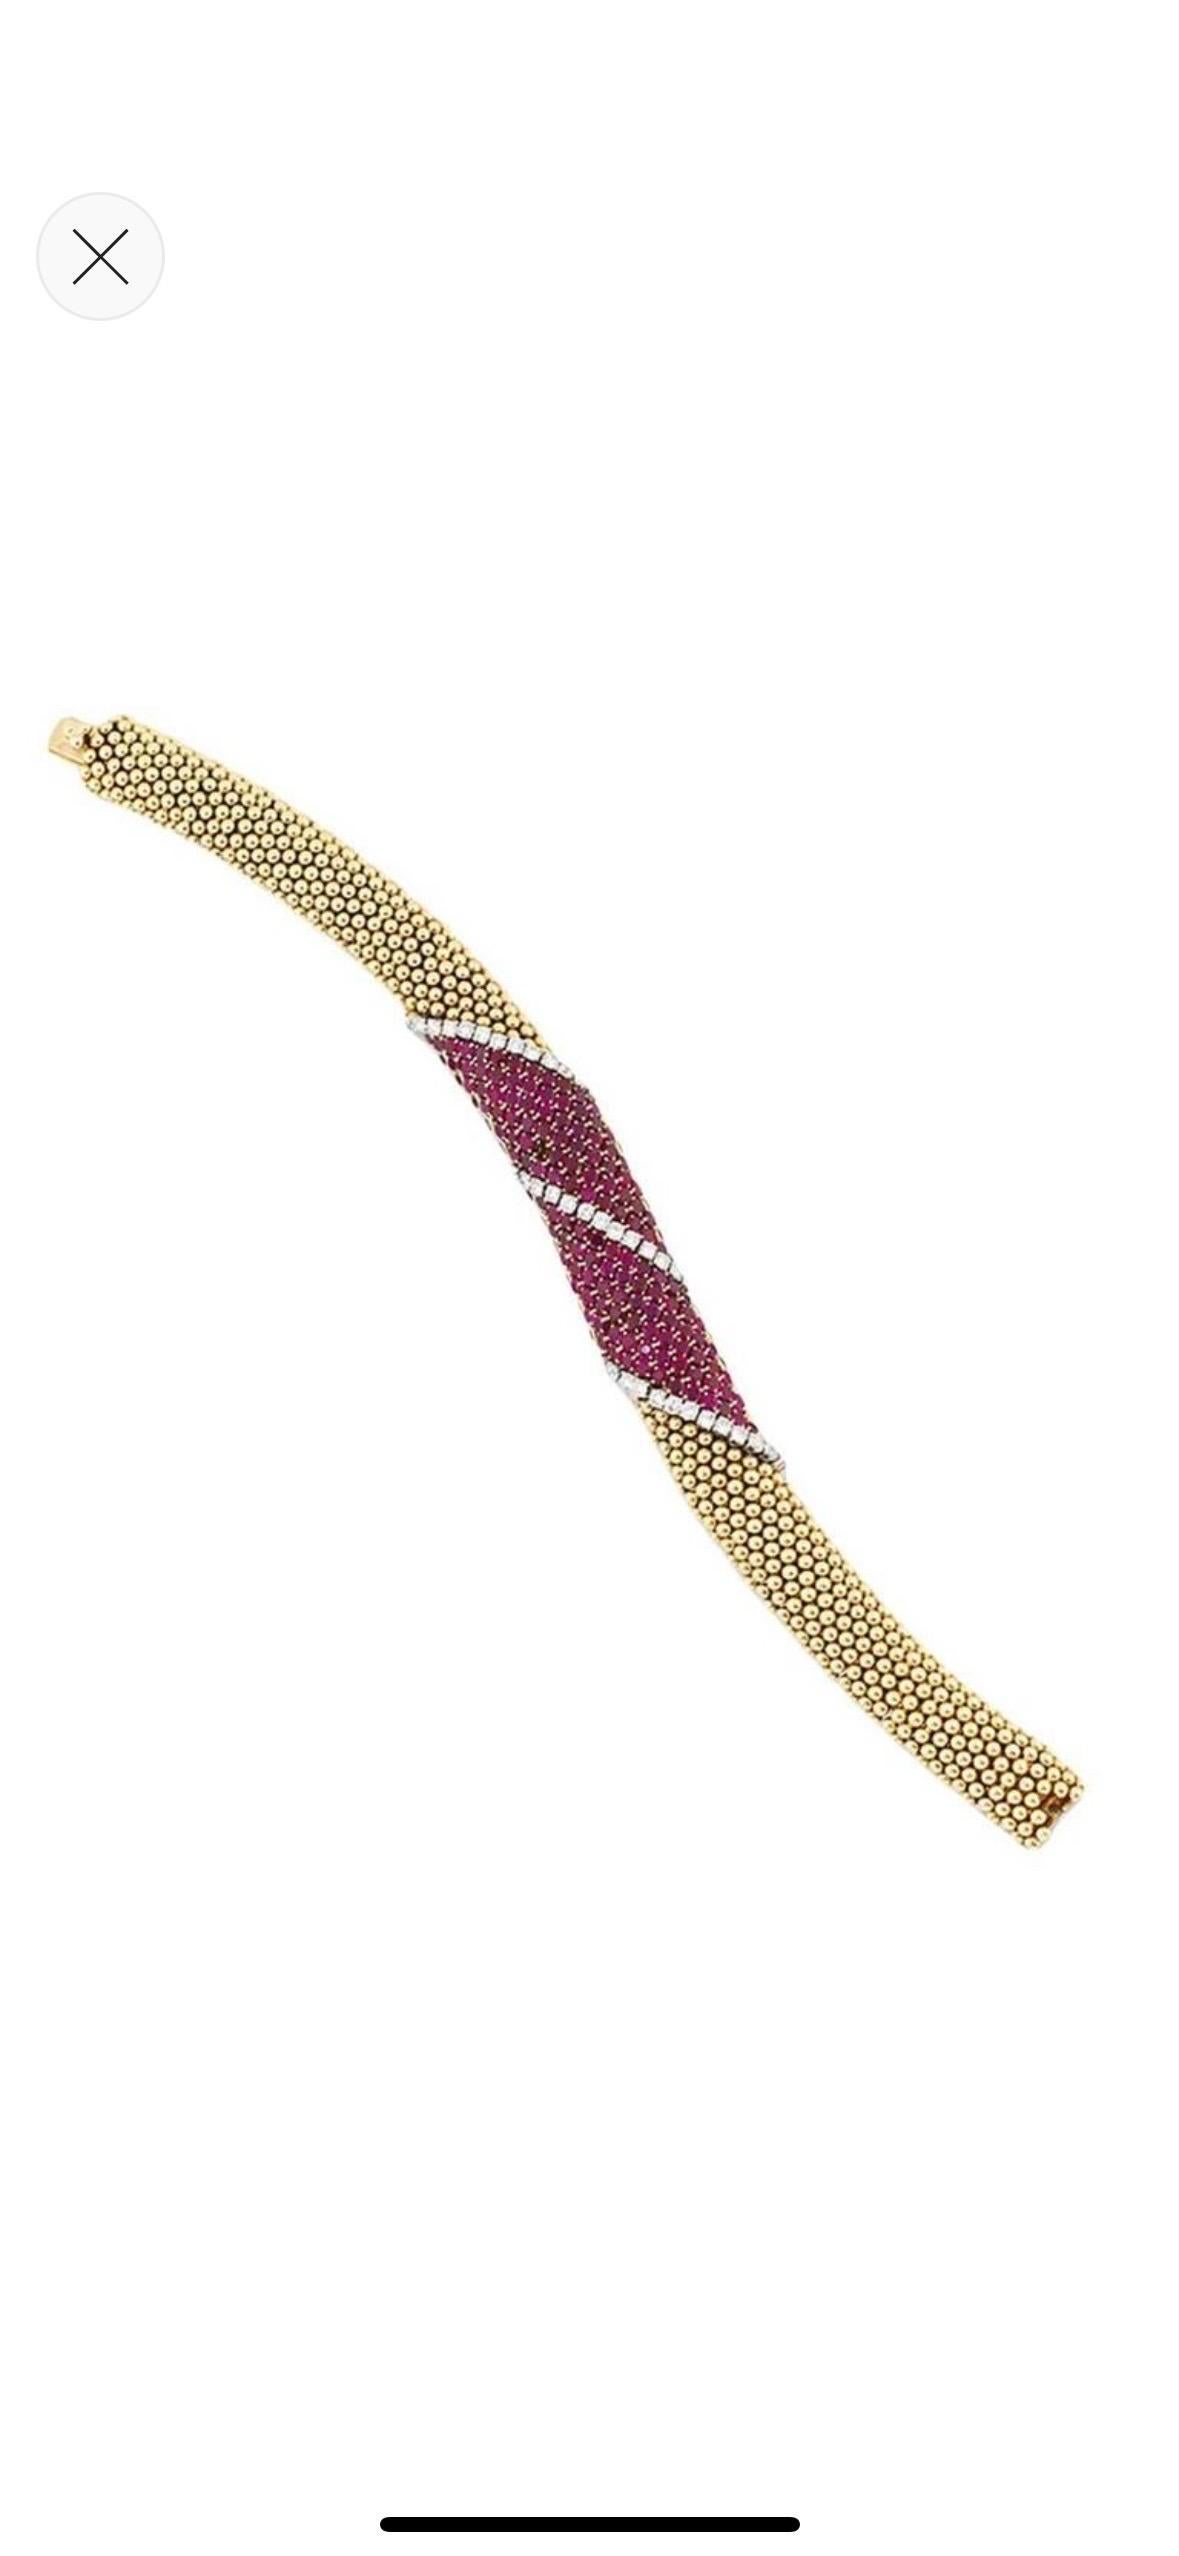 Of flexible tubular design, composed of a clustered band of polished spherical beads to a central pavé-set circular-cut ruby panel with diagonal brilliant-cut diamond line highlights, to a concealed clasp. Made in France, circa 1965, with French